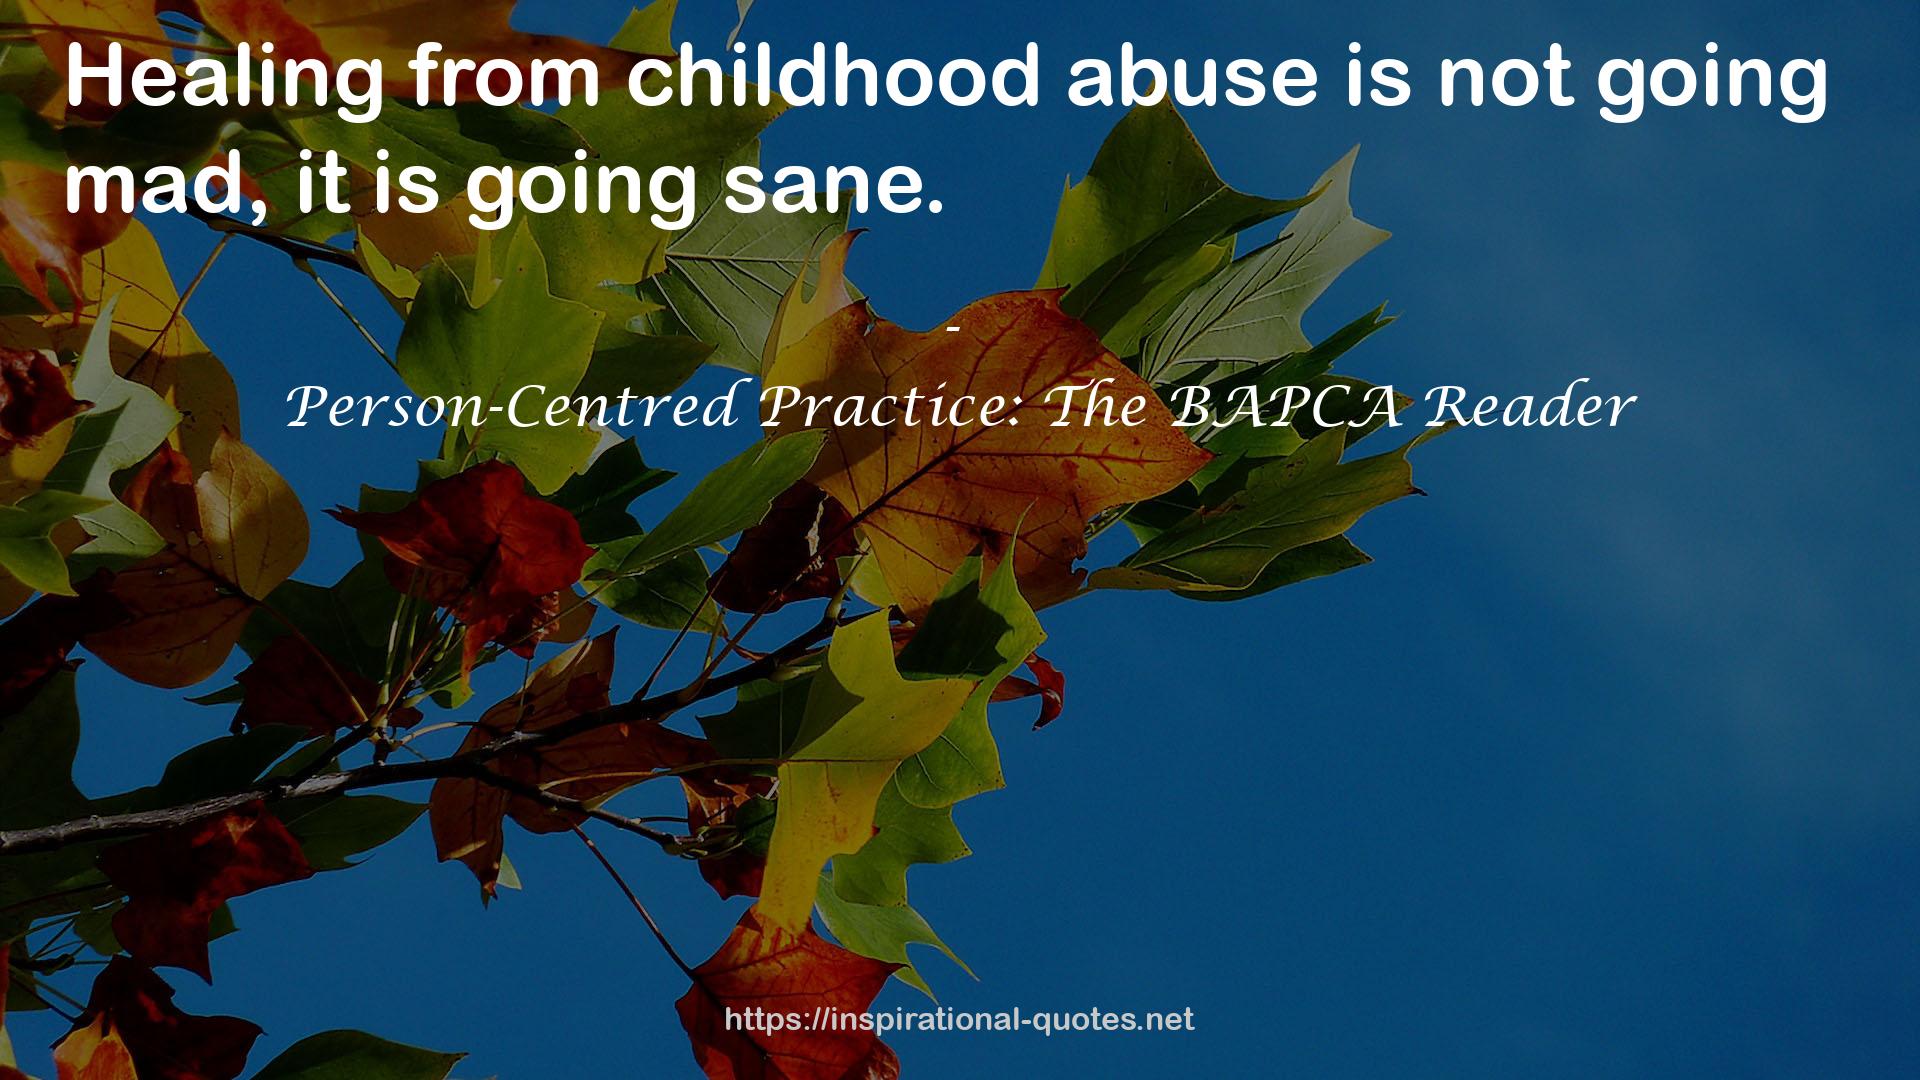 Person-Centred Practice: The BAPCA Reader QUOTES